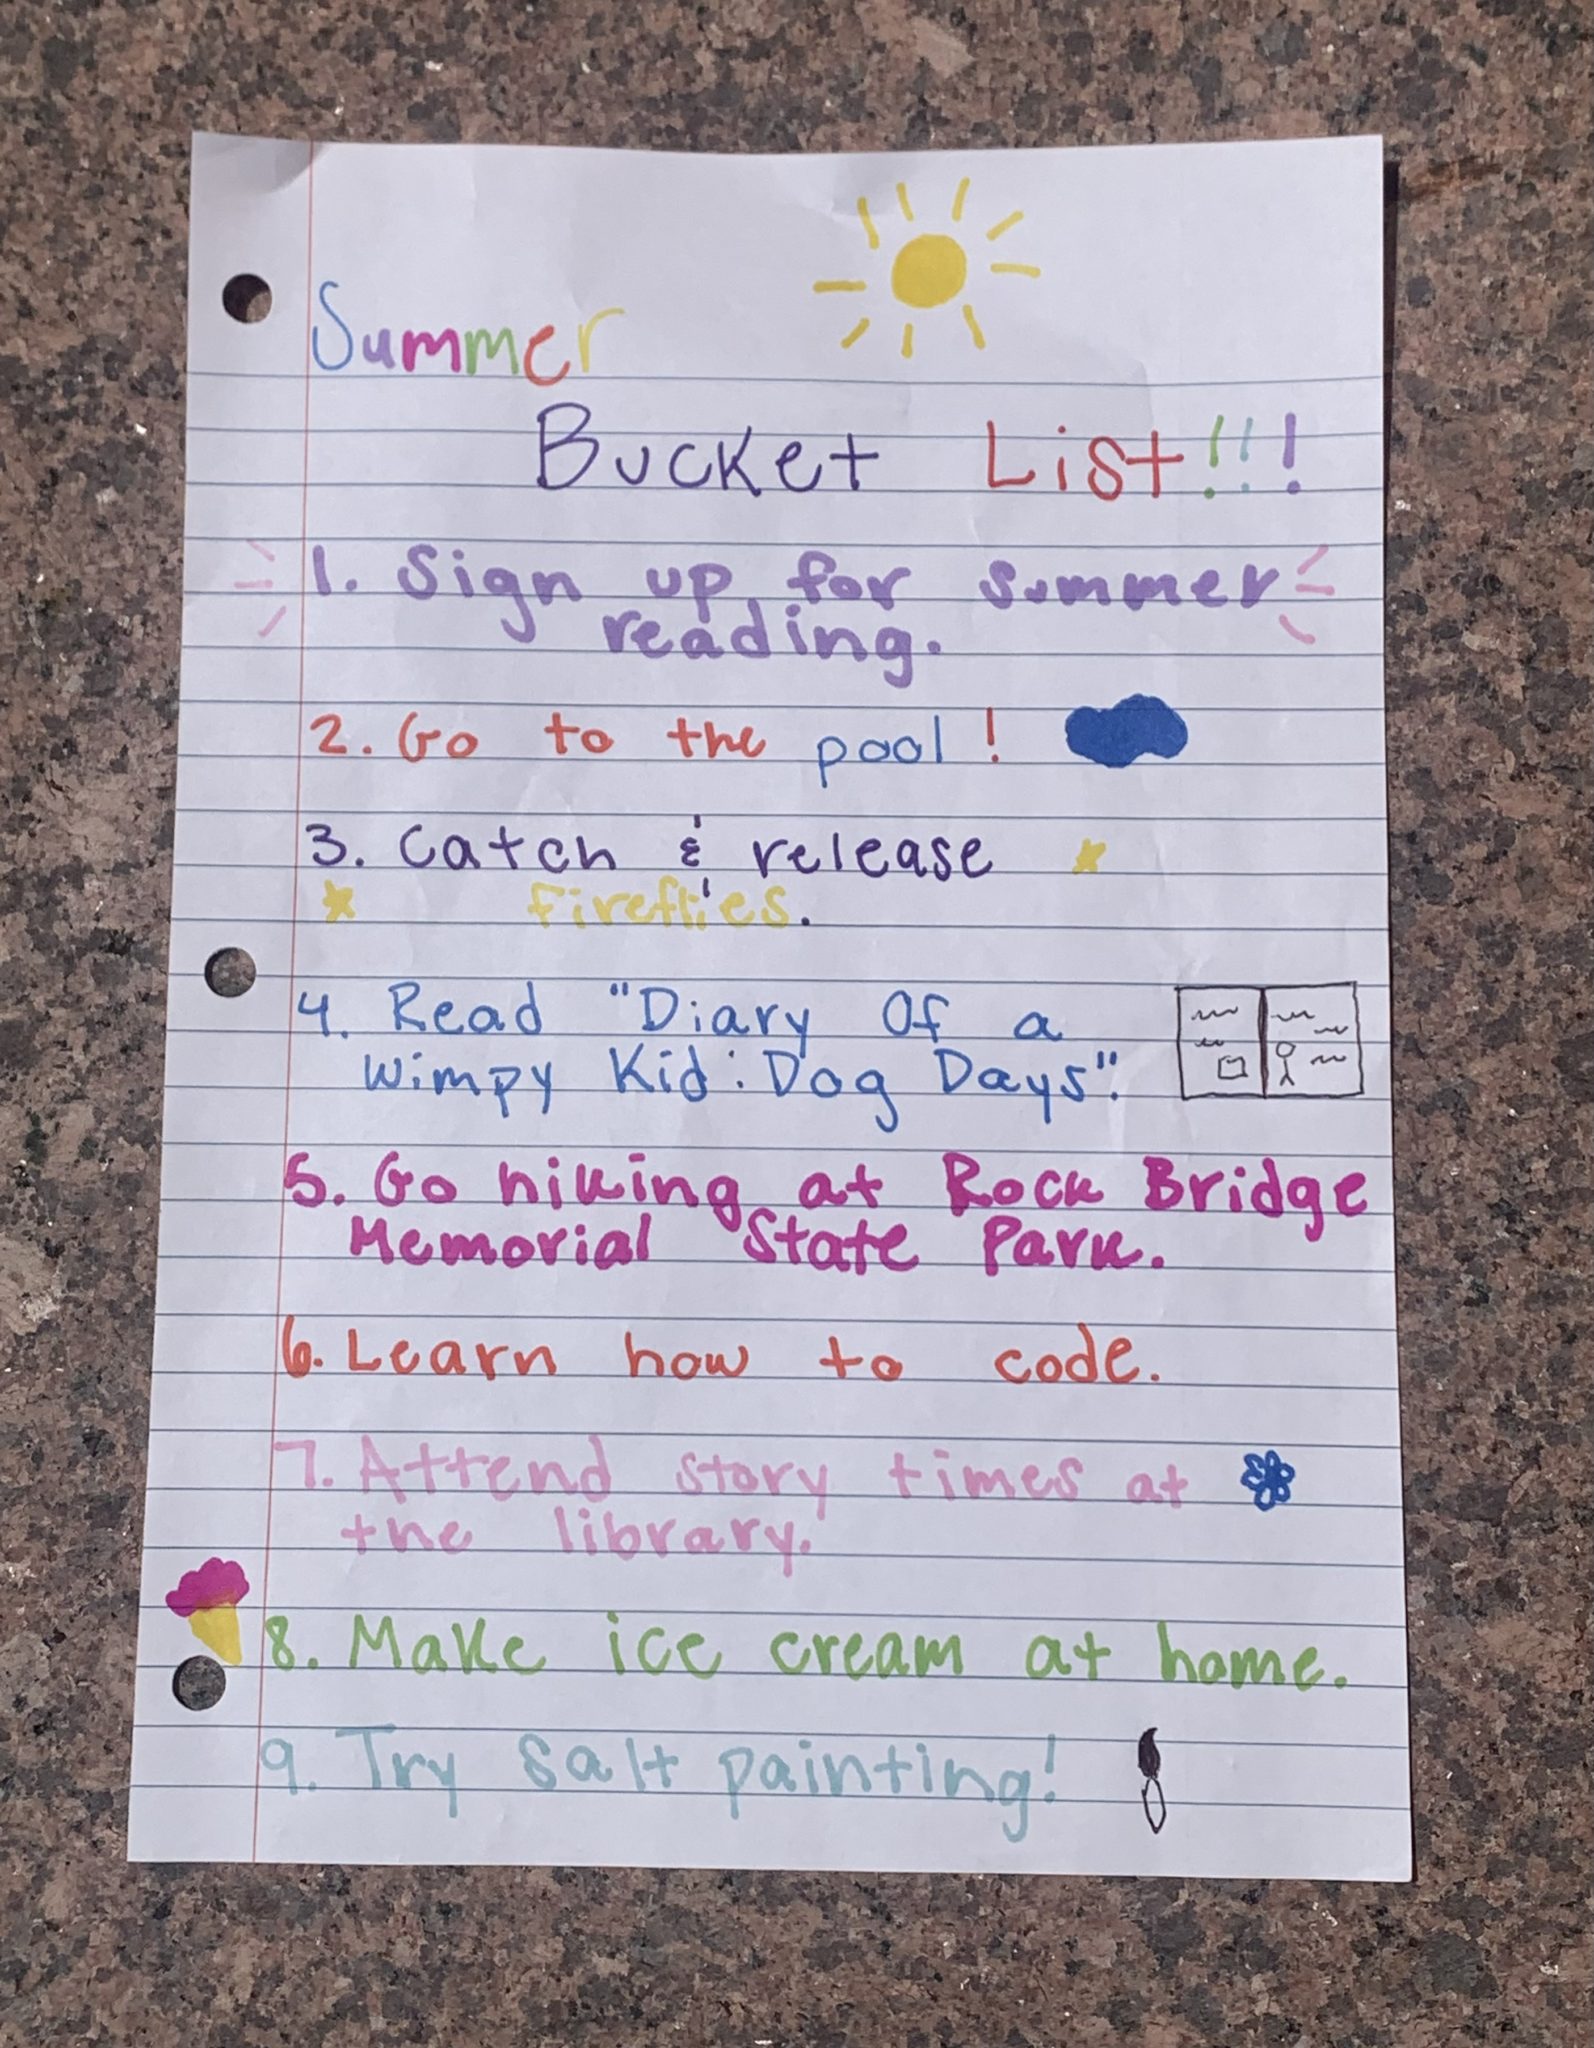 Photo of a paper that displays a summer bucket list.